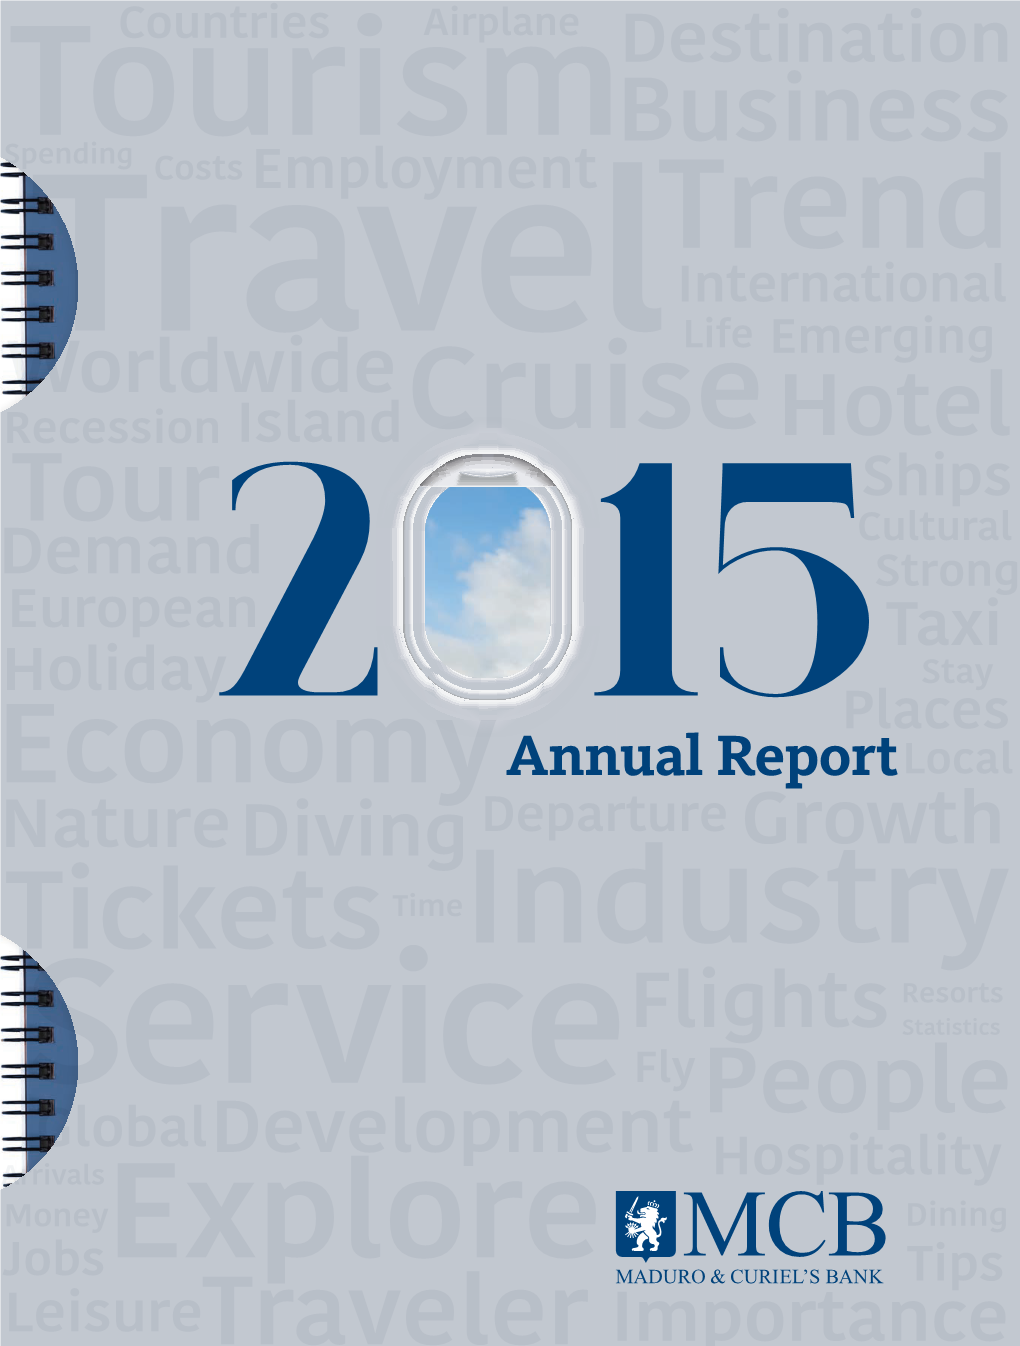 Annual Report Highlights of Consolidated Position